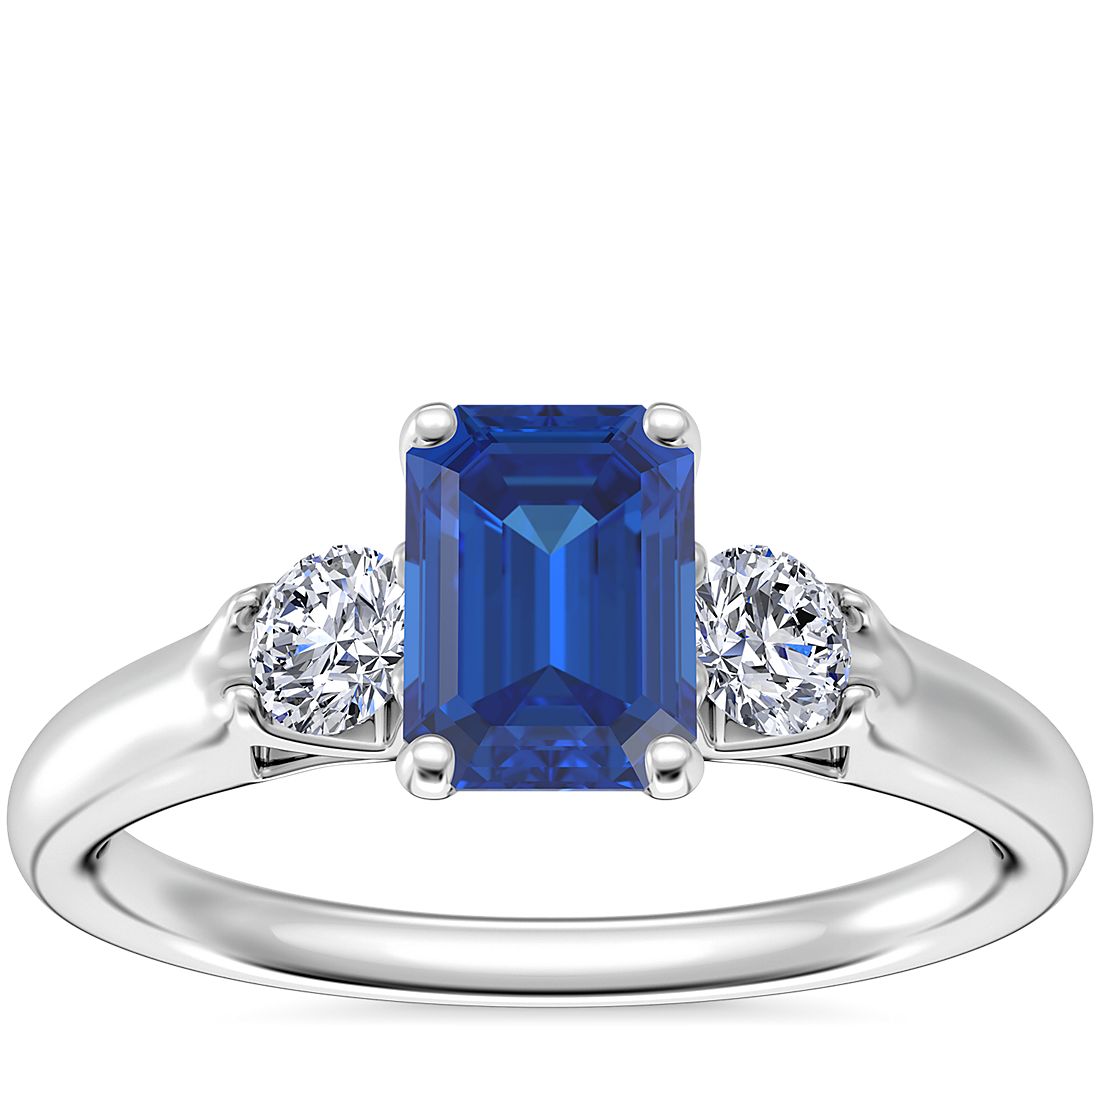 Classic Three Stone Engagement Ring with Emerald-Cut Sapphire in 14k White Gold (7x5mm)